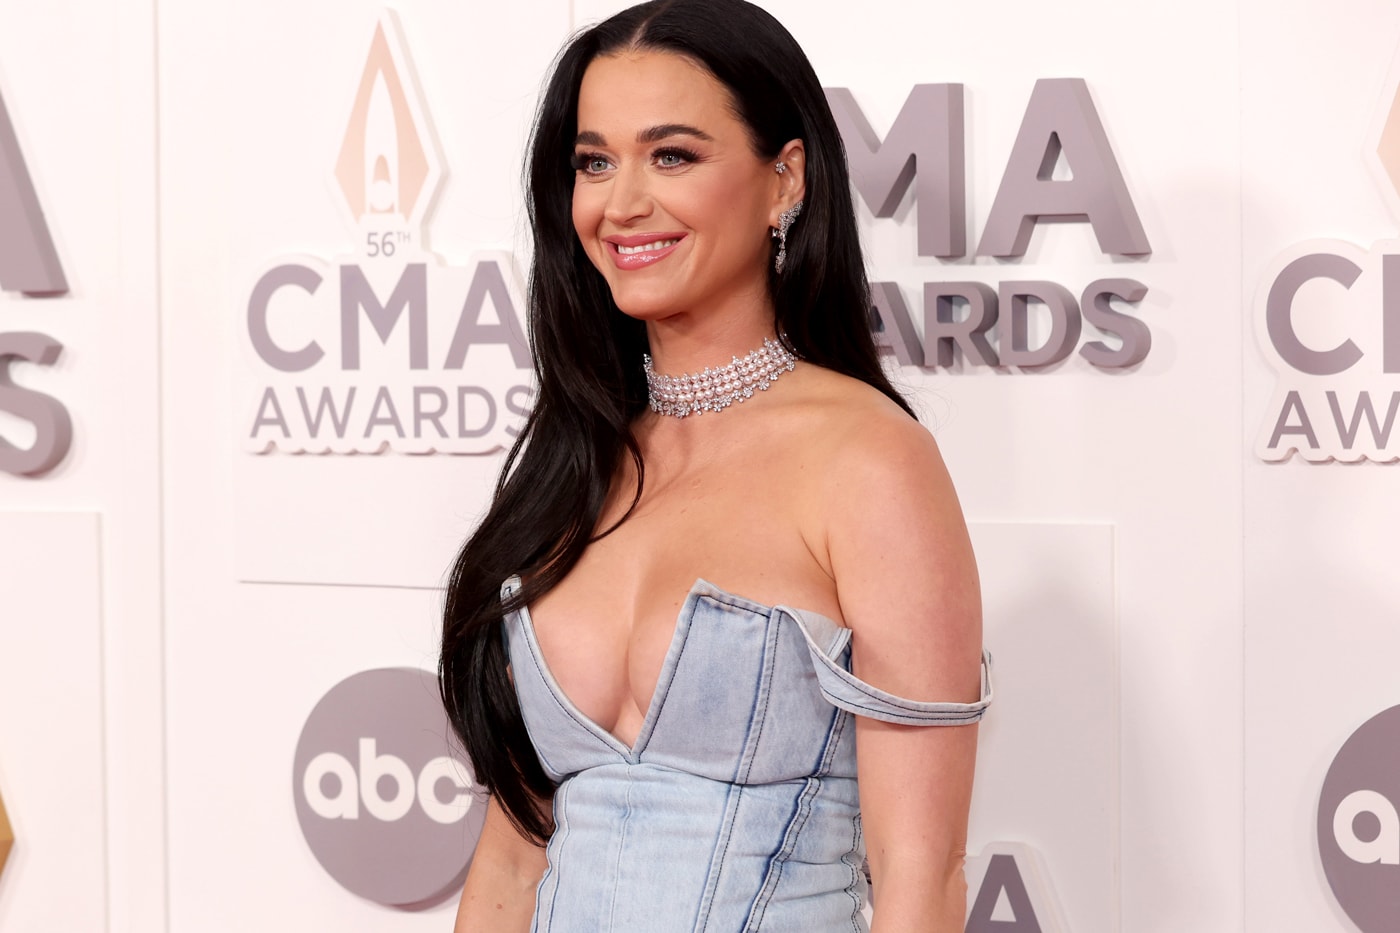 Katy Perry Has Sold Her Catalog Rights for $225 Million USD